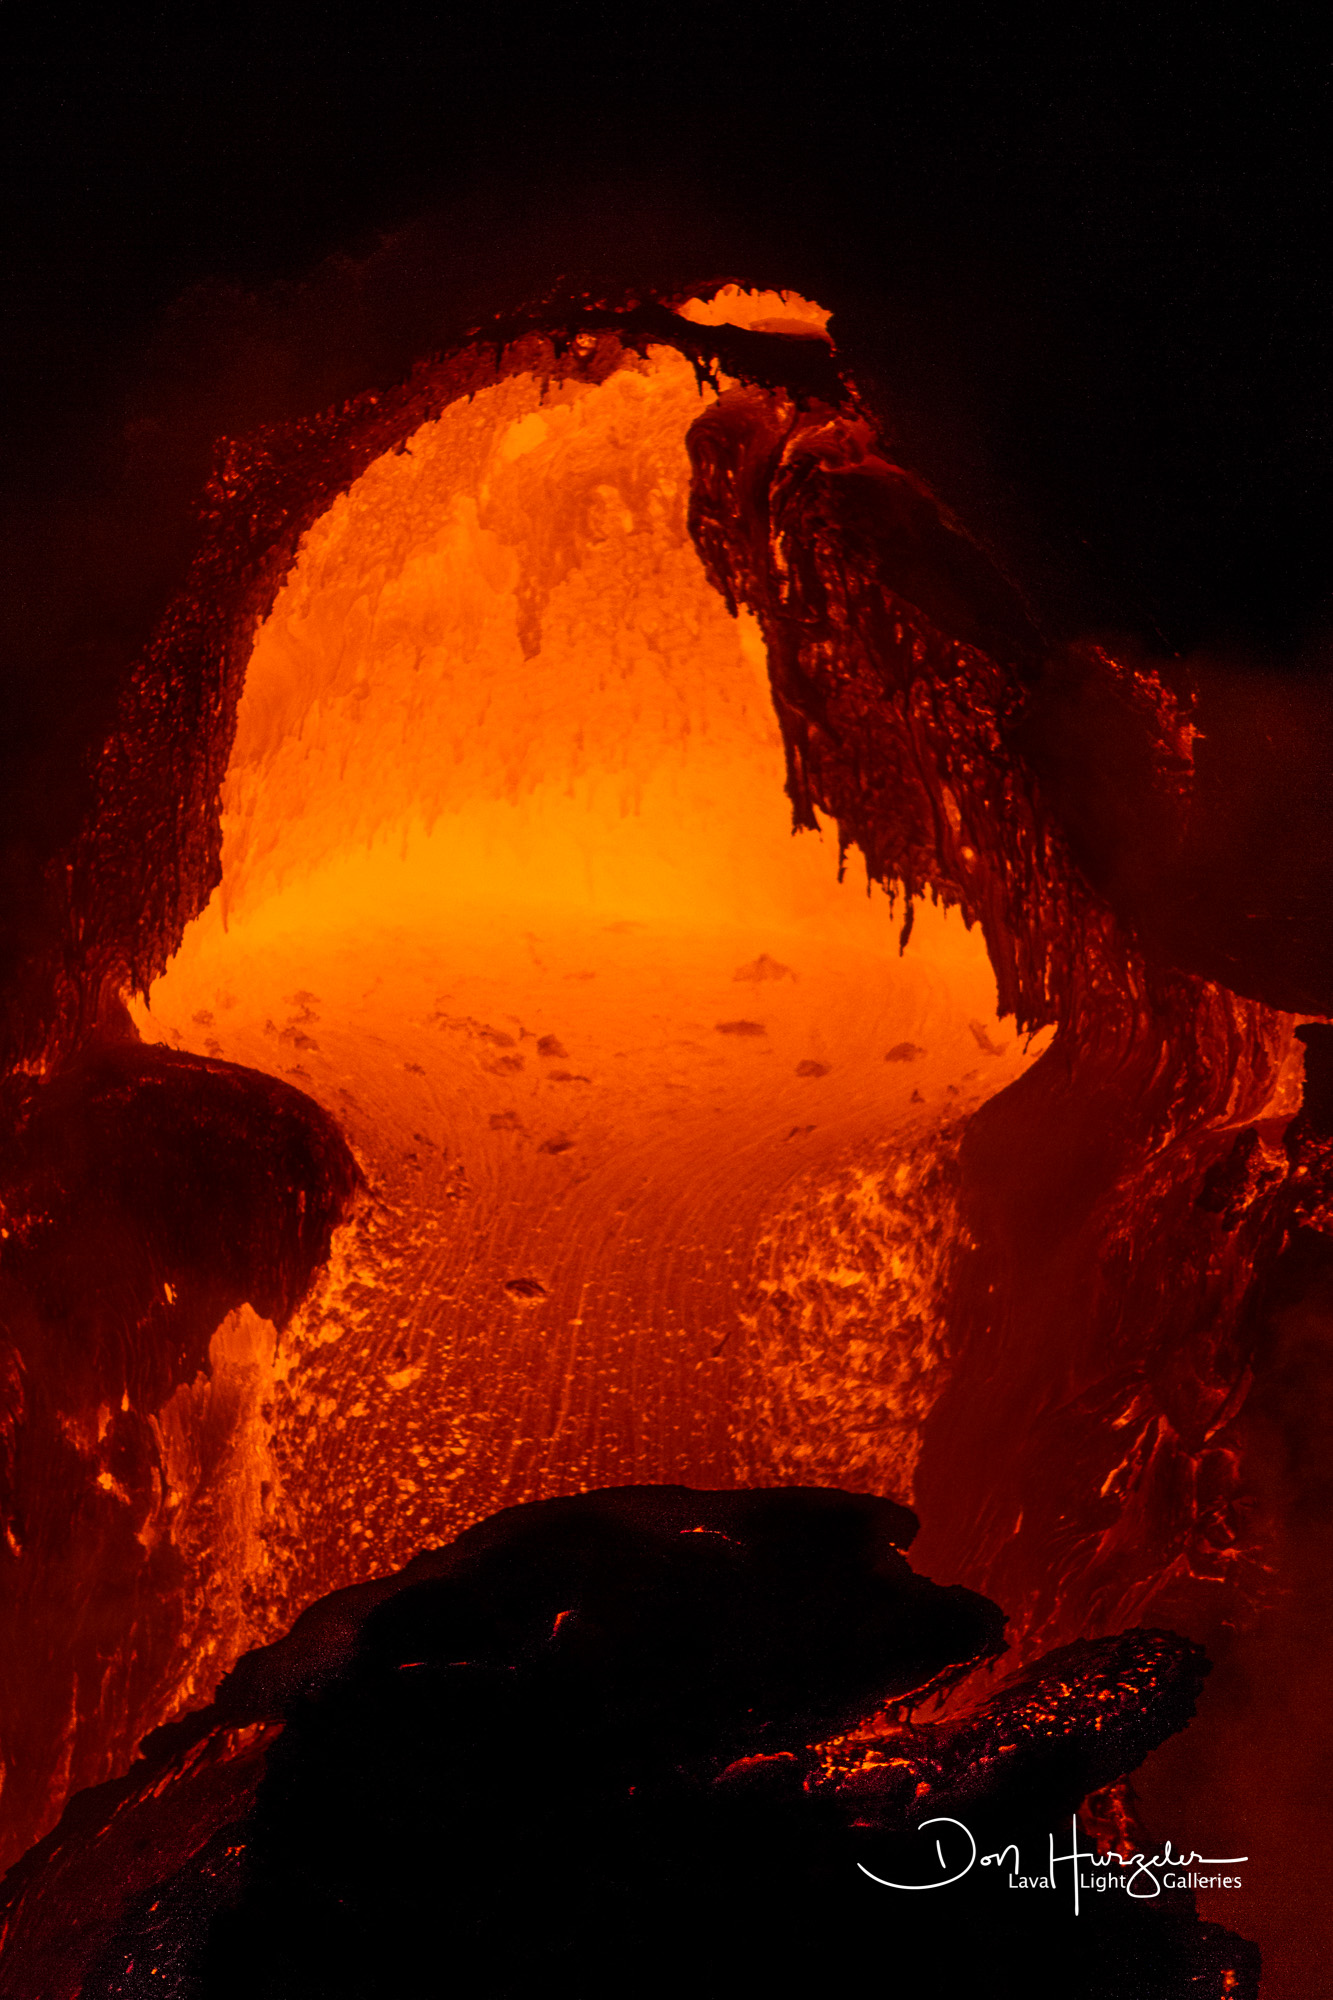 Looking directly inside a lava tube as it pours lava into the sea.